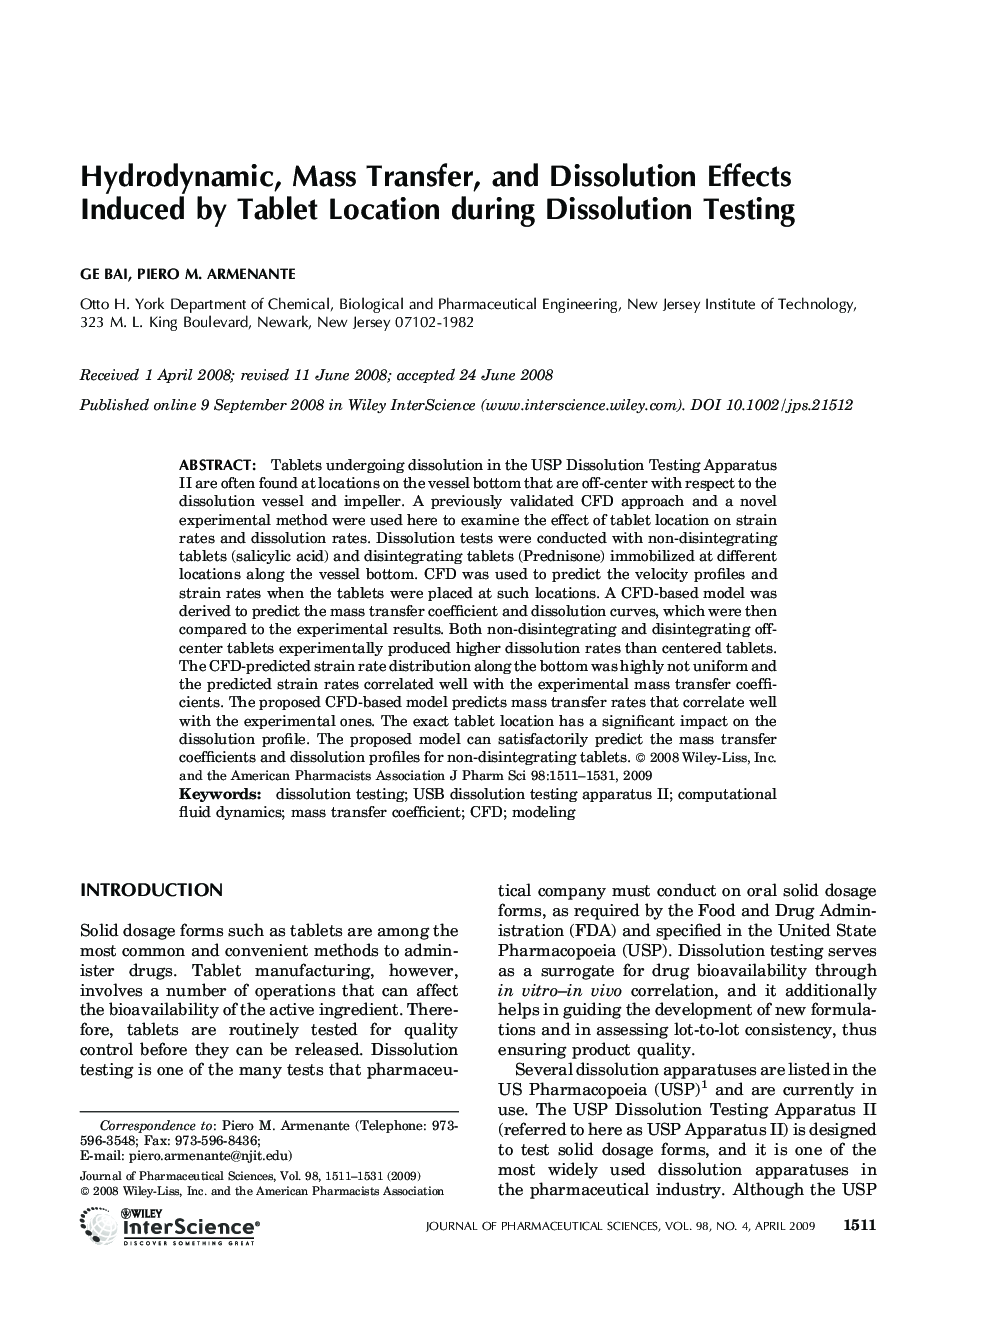 Hydrodynamic, mass transfer, and dissolution effects induced by tablet location during dissolution testing